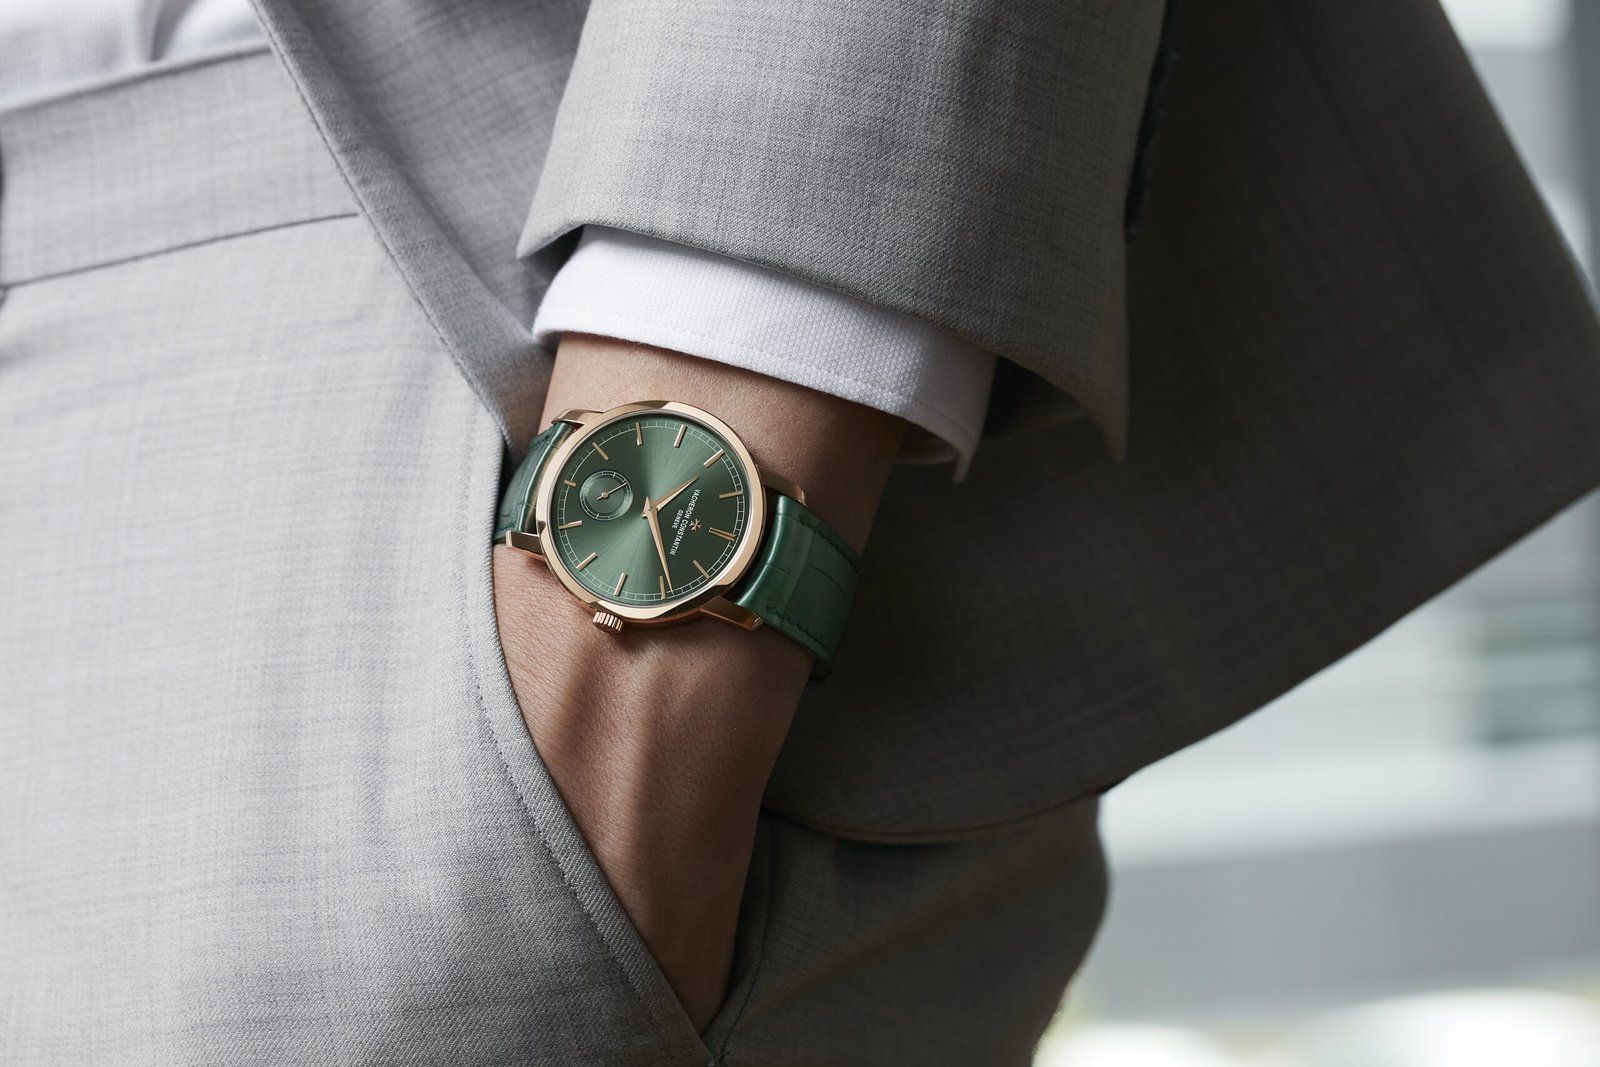 The latest timepieces in the Traditionnelle collection are executed at the highest standards of dress watch excellence